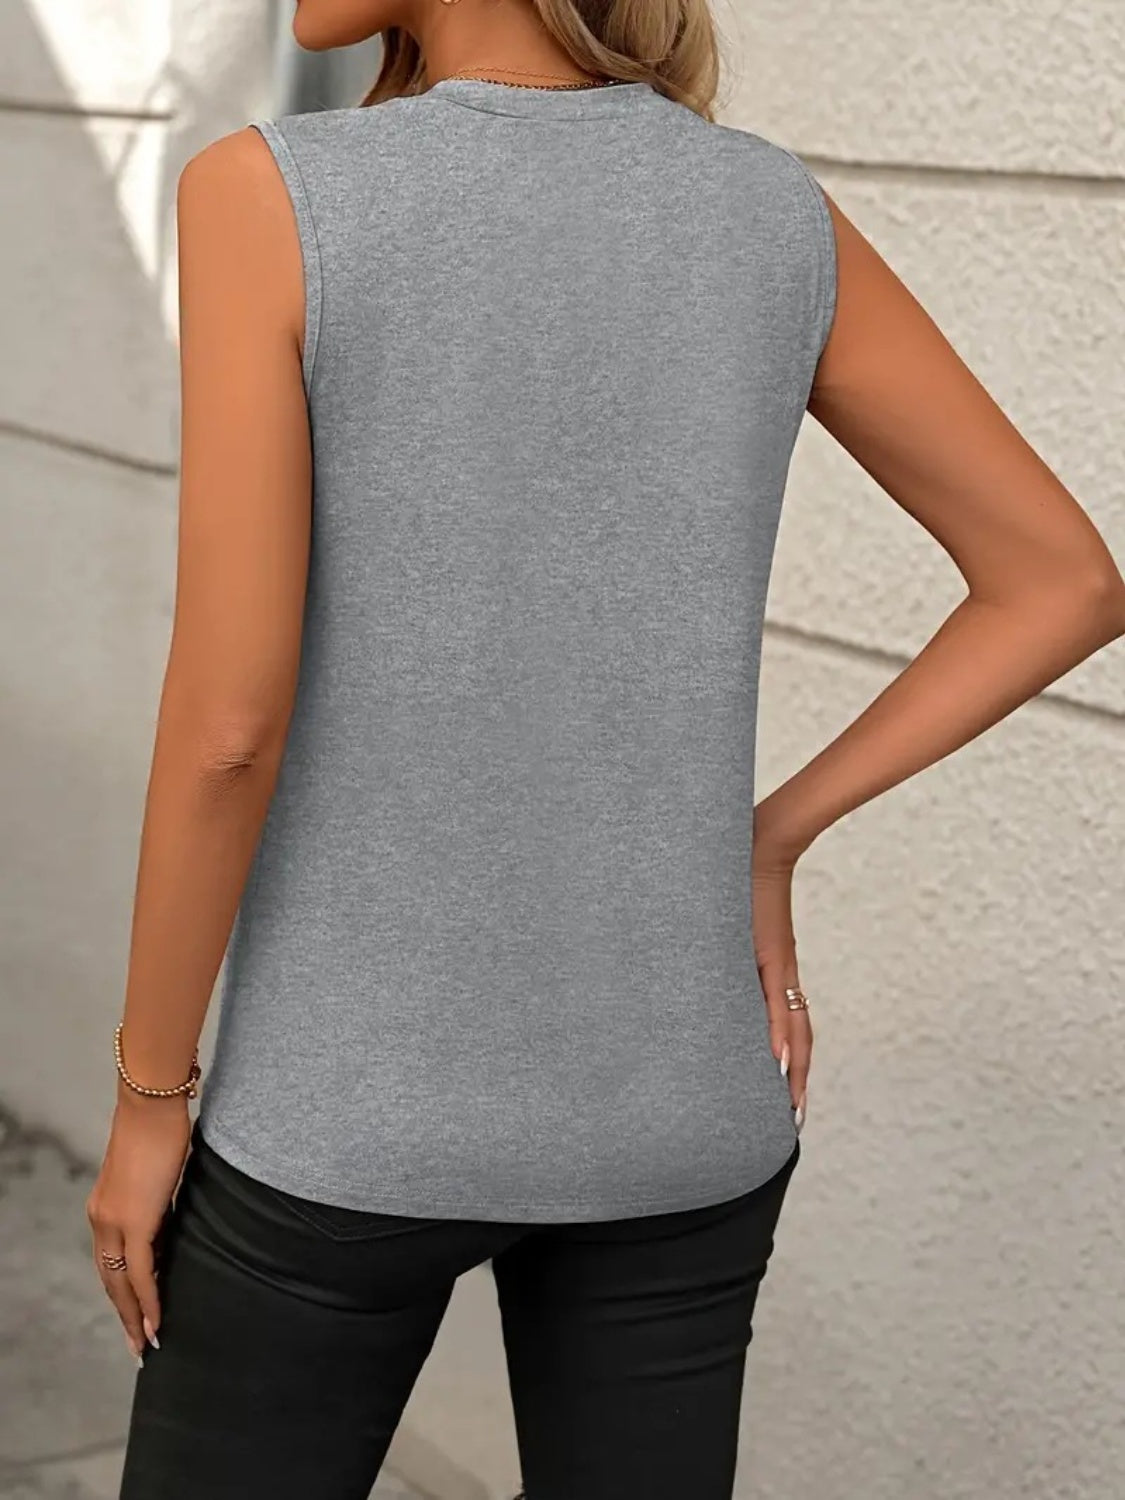 Stylish Round Neck Sleeveless Tank in various colors. Perfect blend of elegance & comfort for any occasion. Shop your go-to summer essential now!